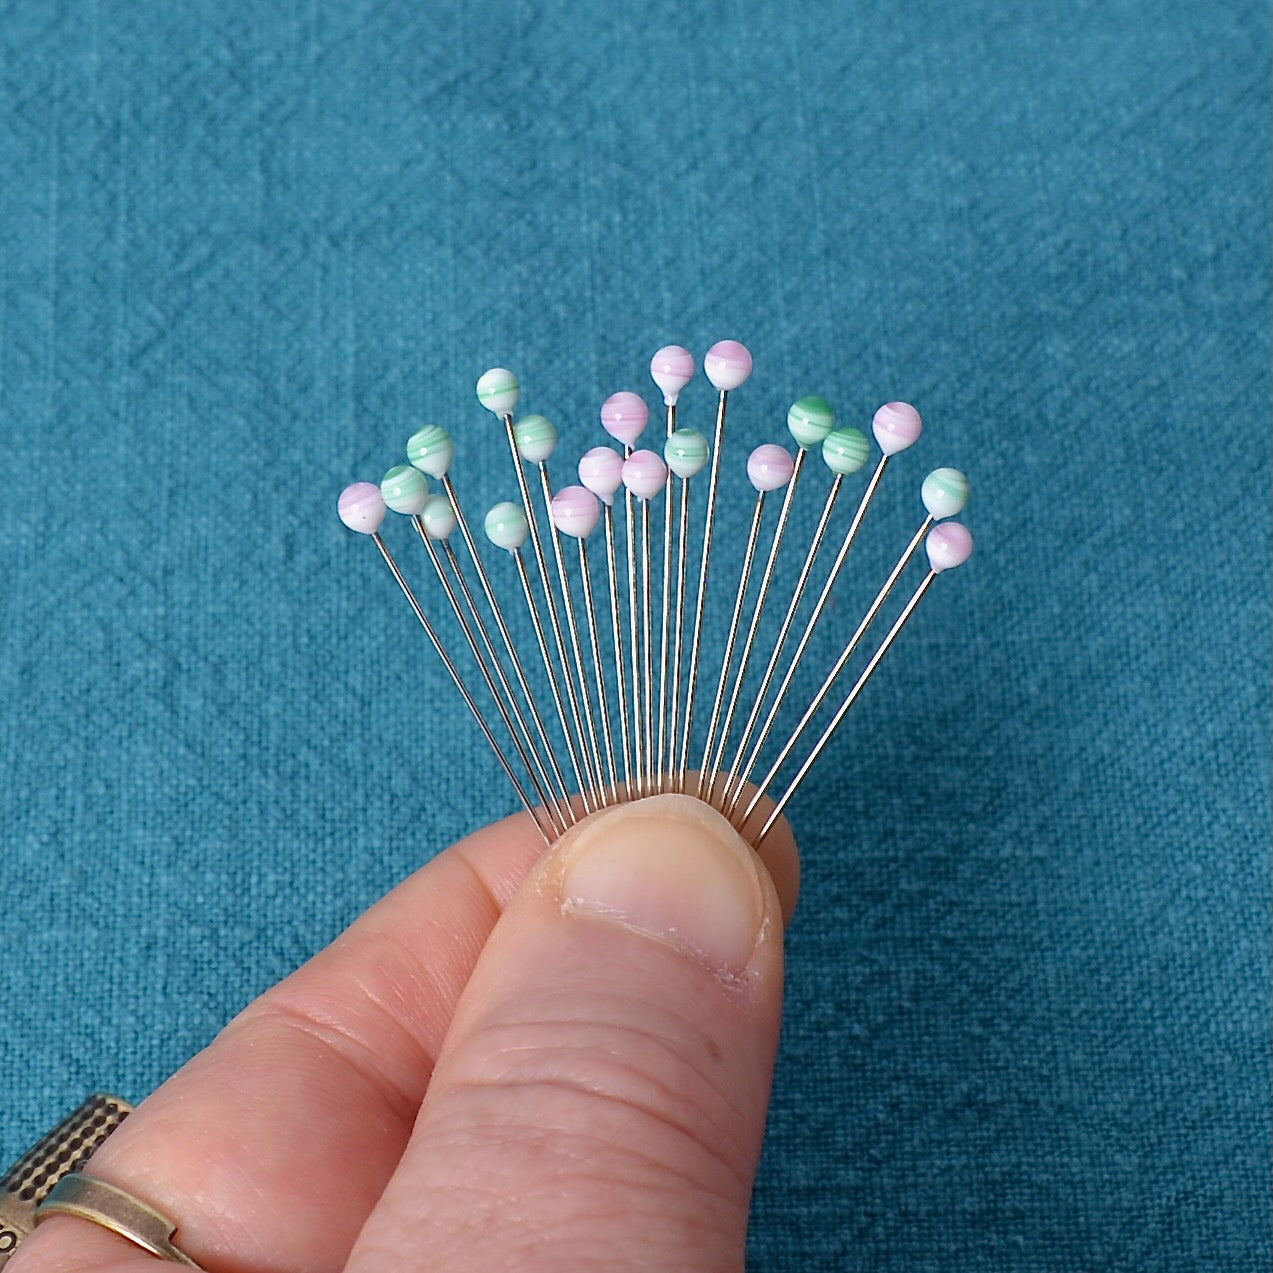 Sewing Pins, Straight Pins for Fabric, Black/ White Ball Head